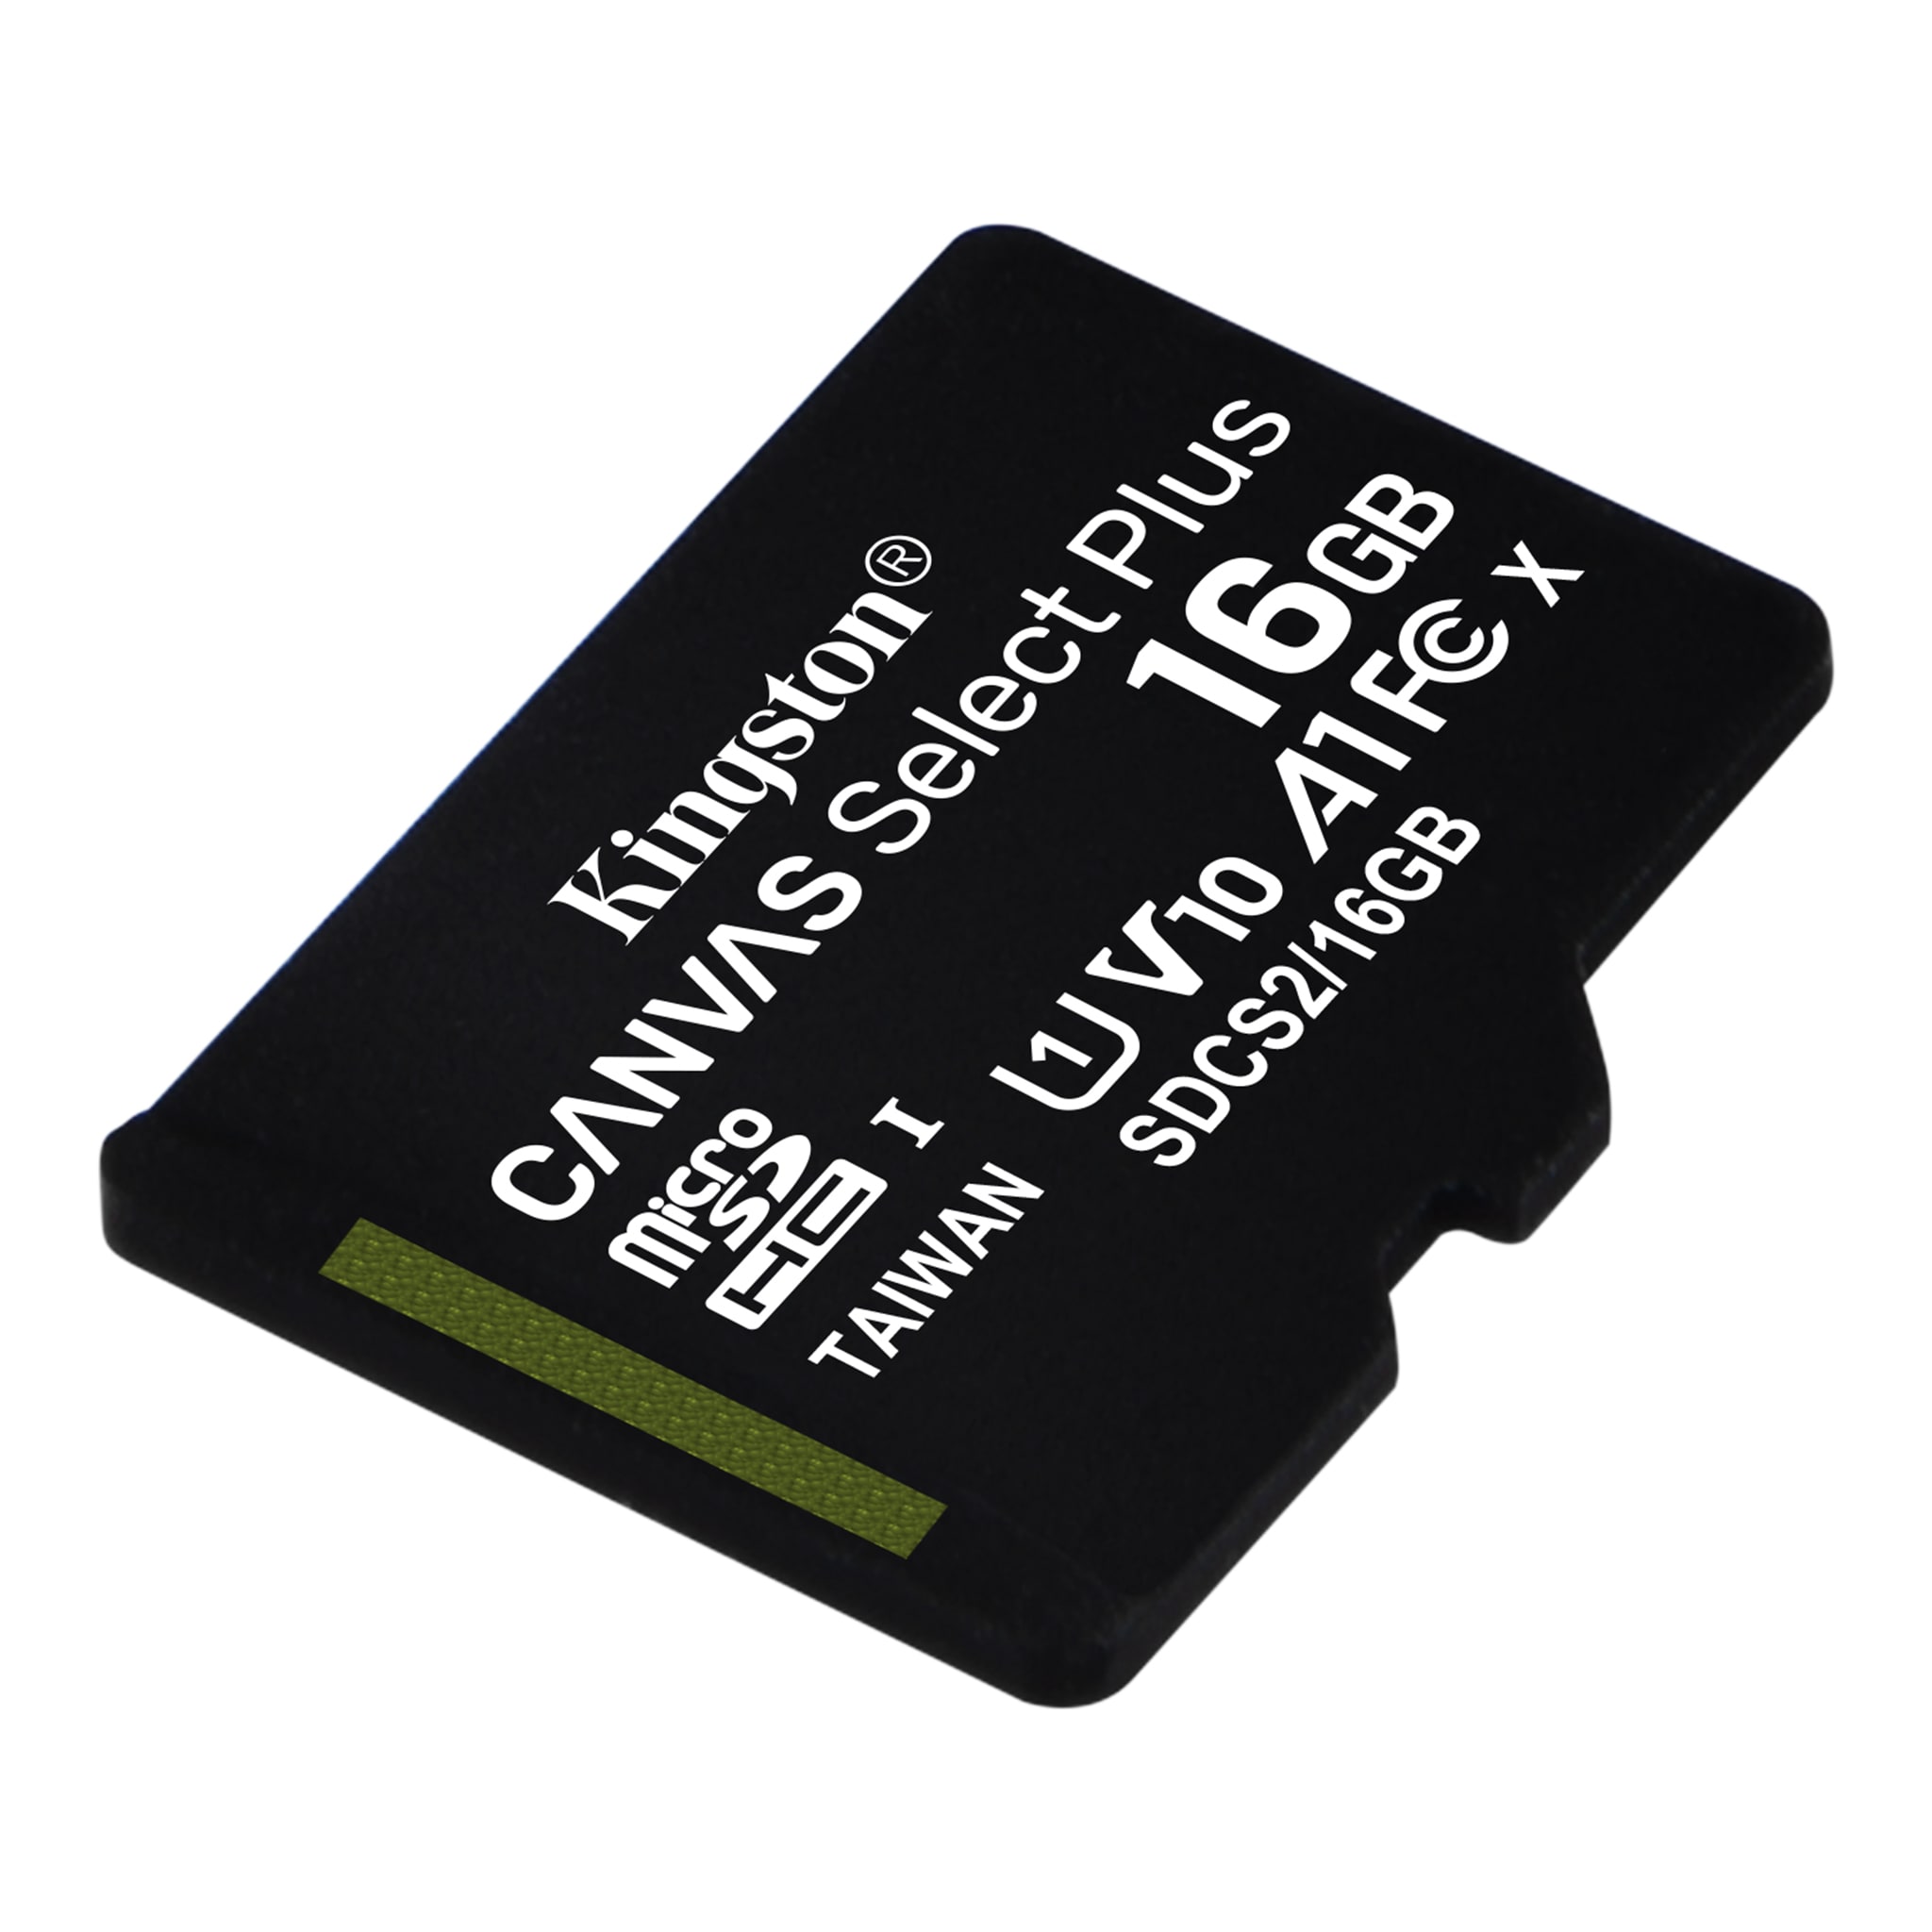 100MBs Works with Kingston Kingston 32GB Samsung SM-G988U MicroSDHC Canvas Select Plus Card Verified by SanFlash.